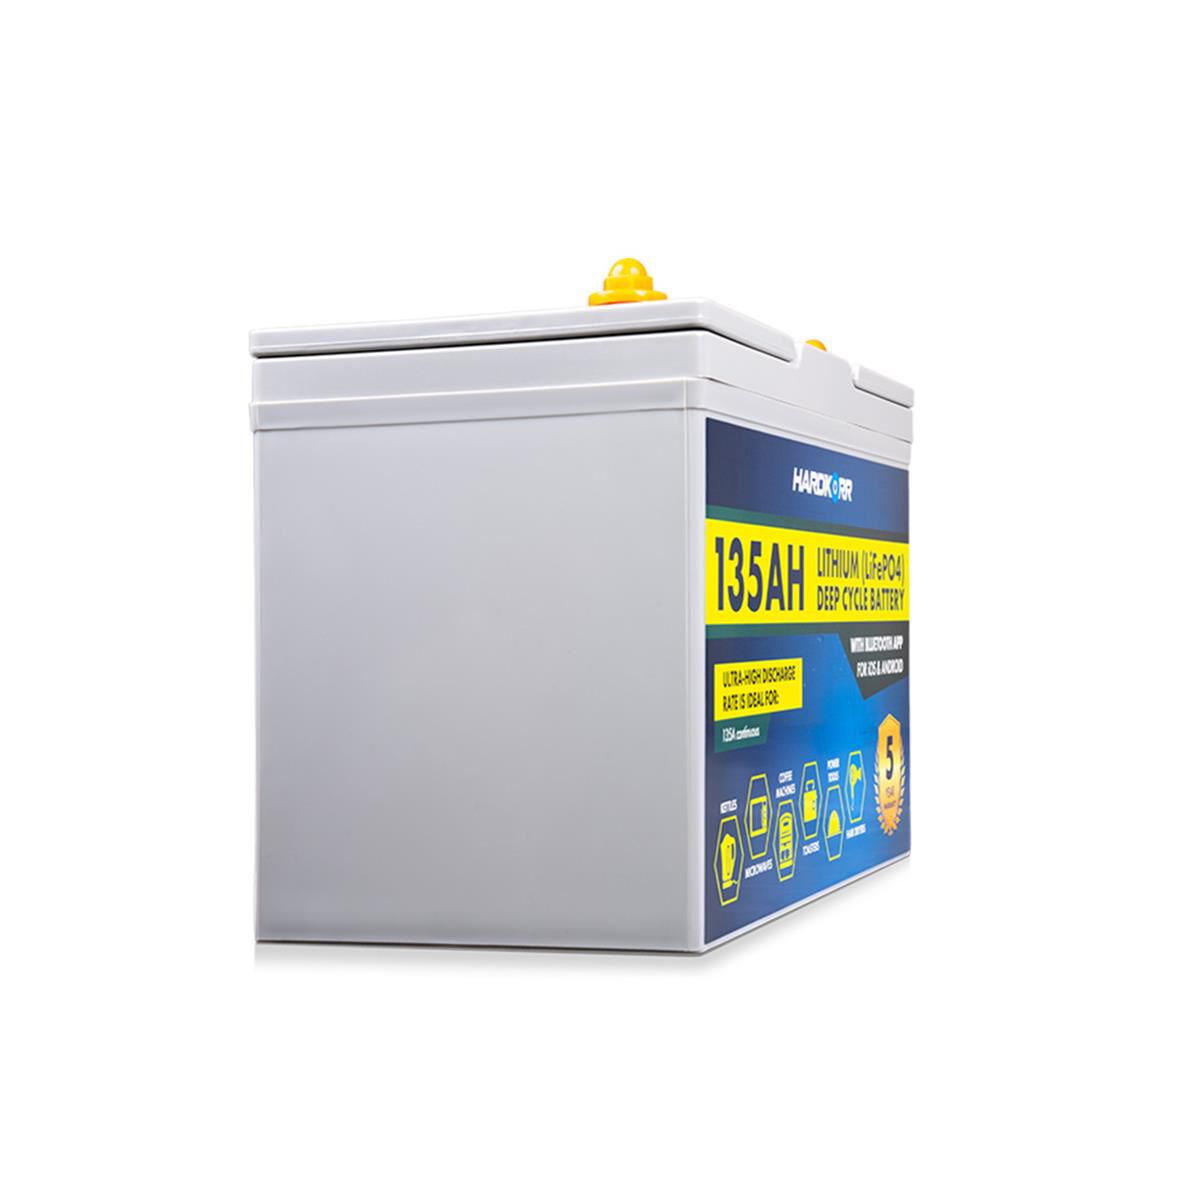 240AH COLD CLIMATE LITHIUM LIFEPO4 DEEP CYCLE BATTERY W/BLUETOOTH, , scaau_hi-res